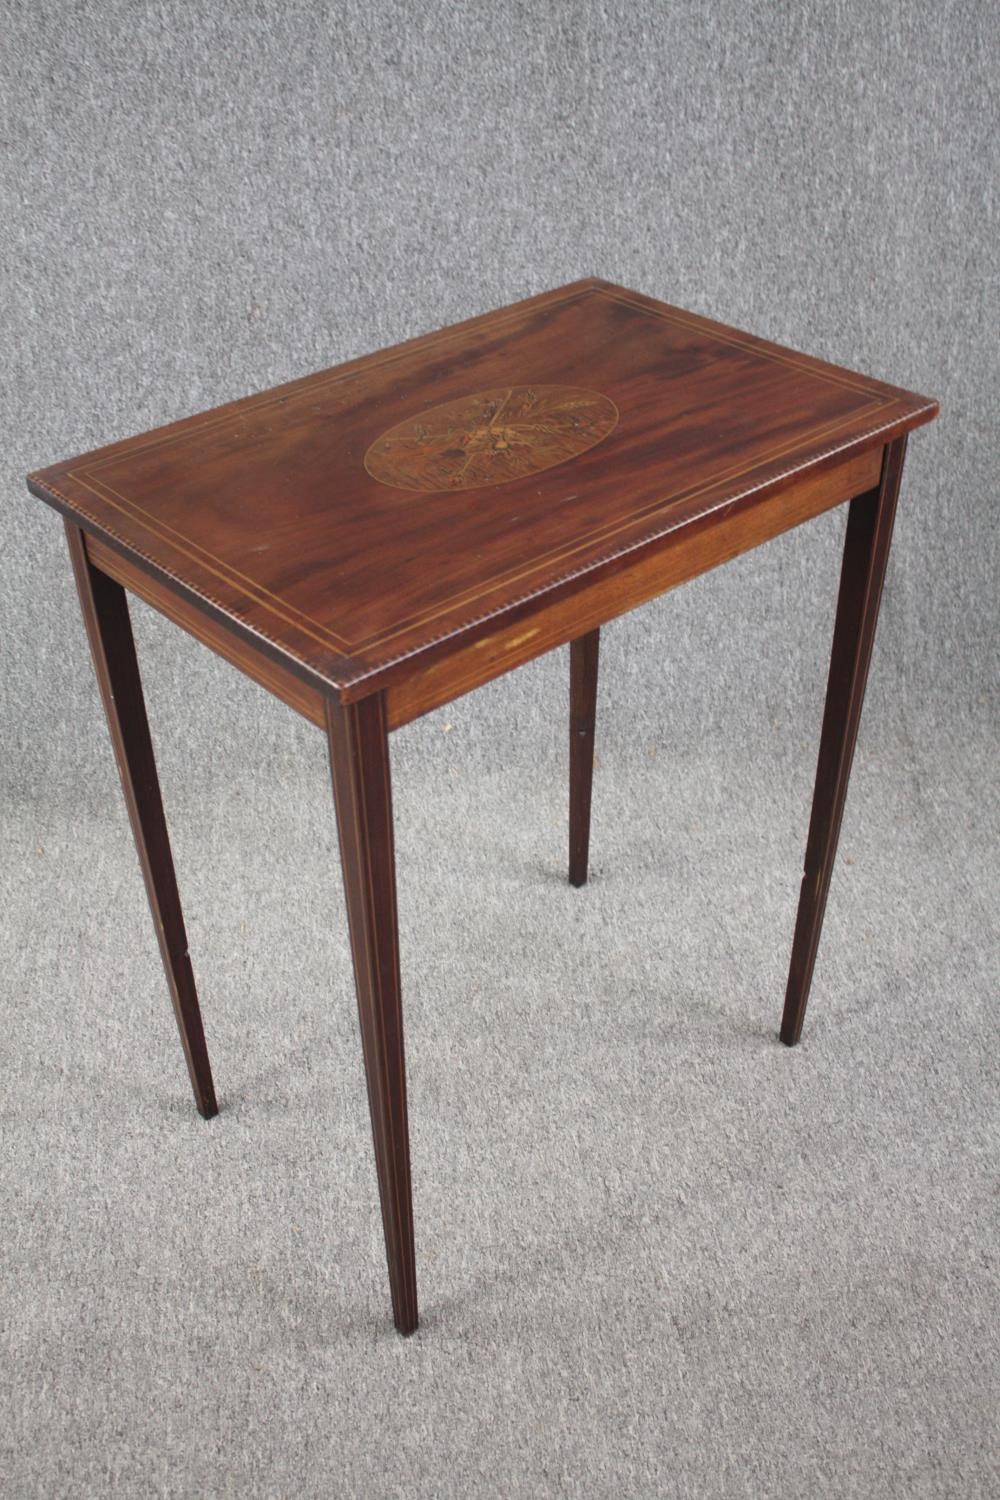 Occasional table, Edwardian mahogany with satinwood marquetry central cartouche. H.78 W.61 D.40cm. - Image 2 of 4